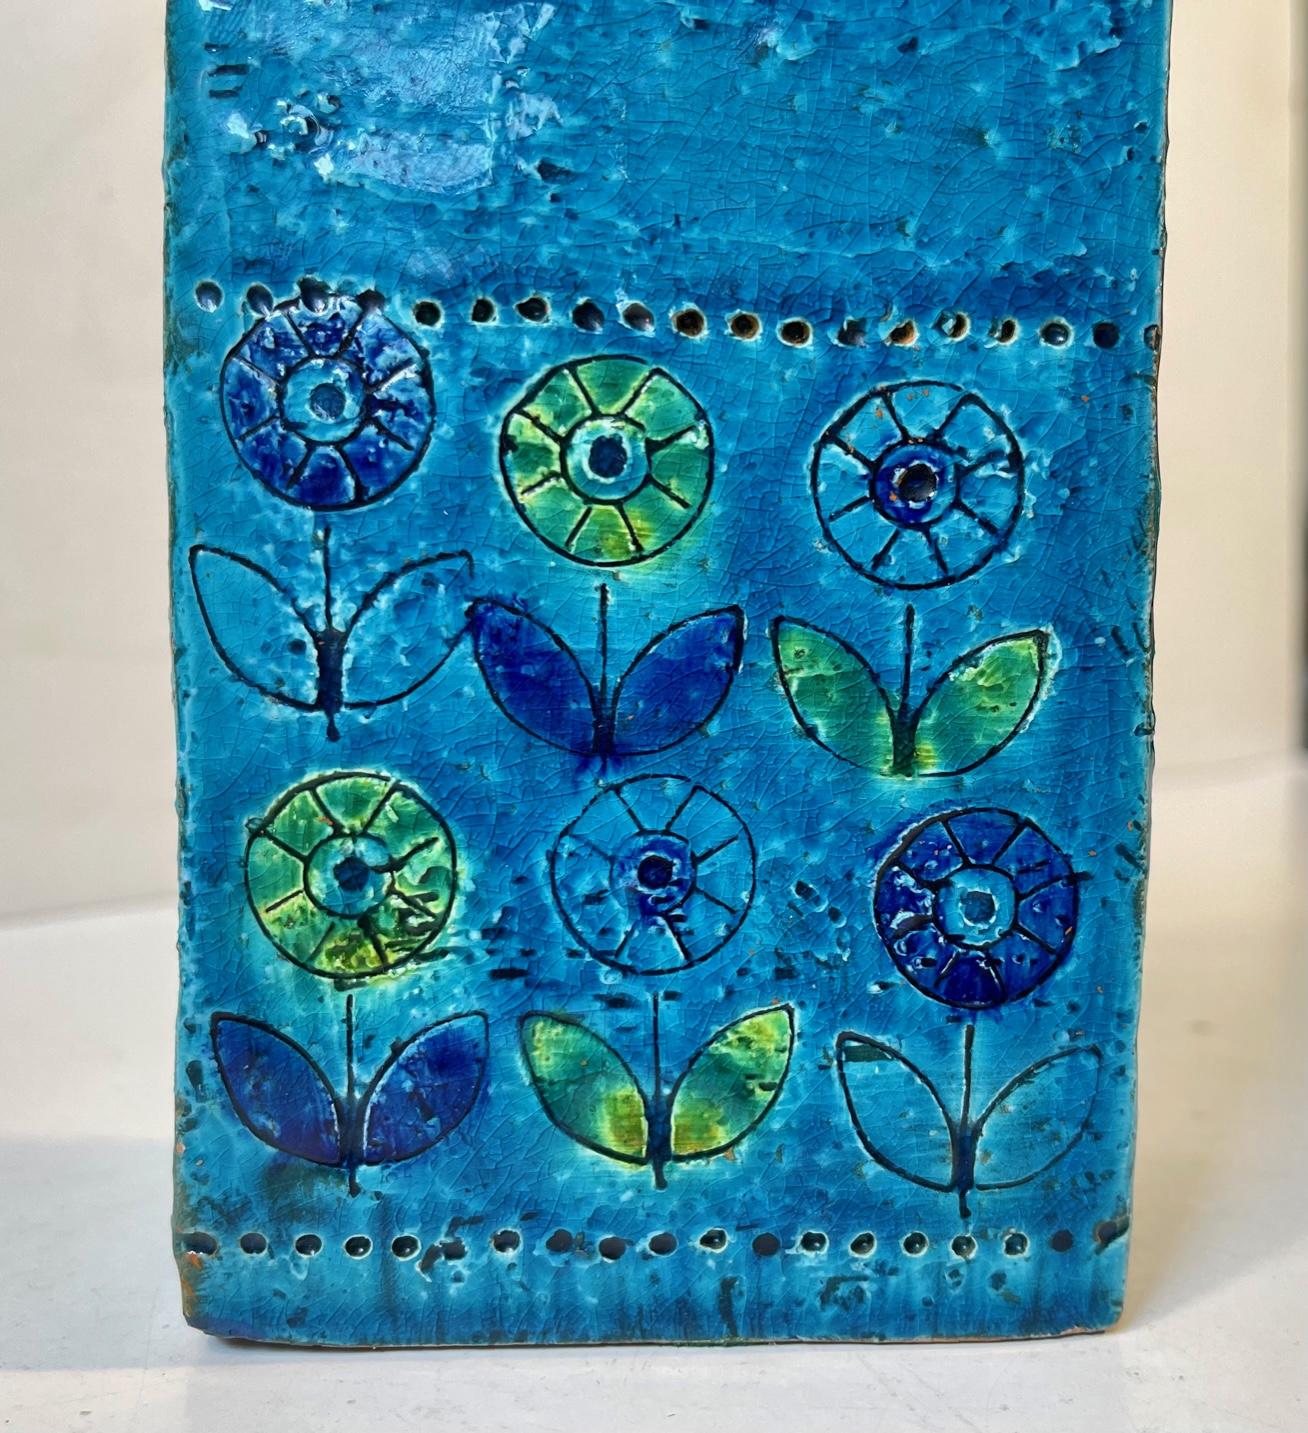 A rare rectangular Rimini-blue Stoneware vase decorated with sunflowers. Designed by Aldo Londi and manufactured in Italy by Bitossi during the 1960s. Measurements: H: 16.5 cm, W/D: 8.5/5.5 cm.